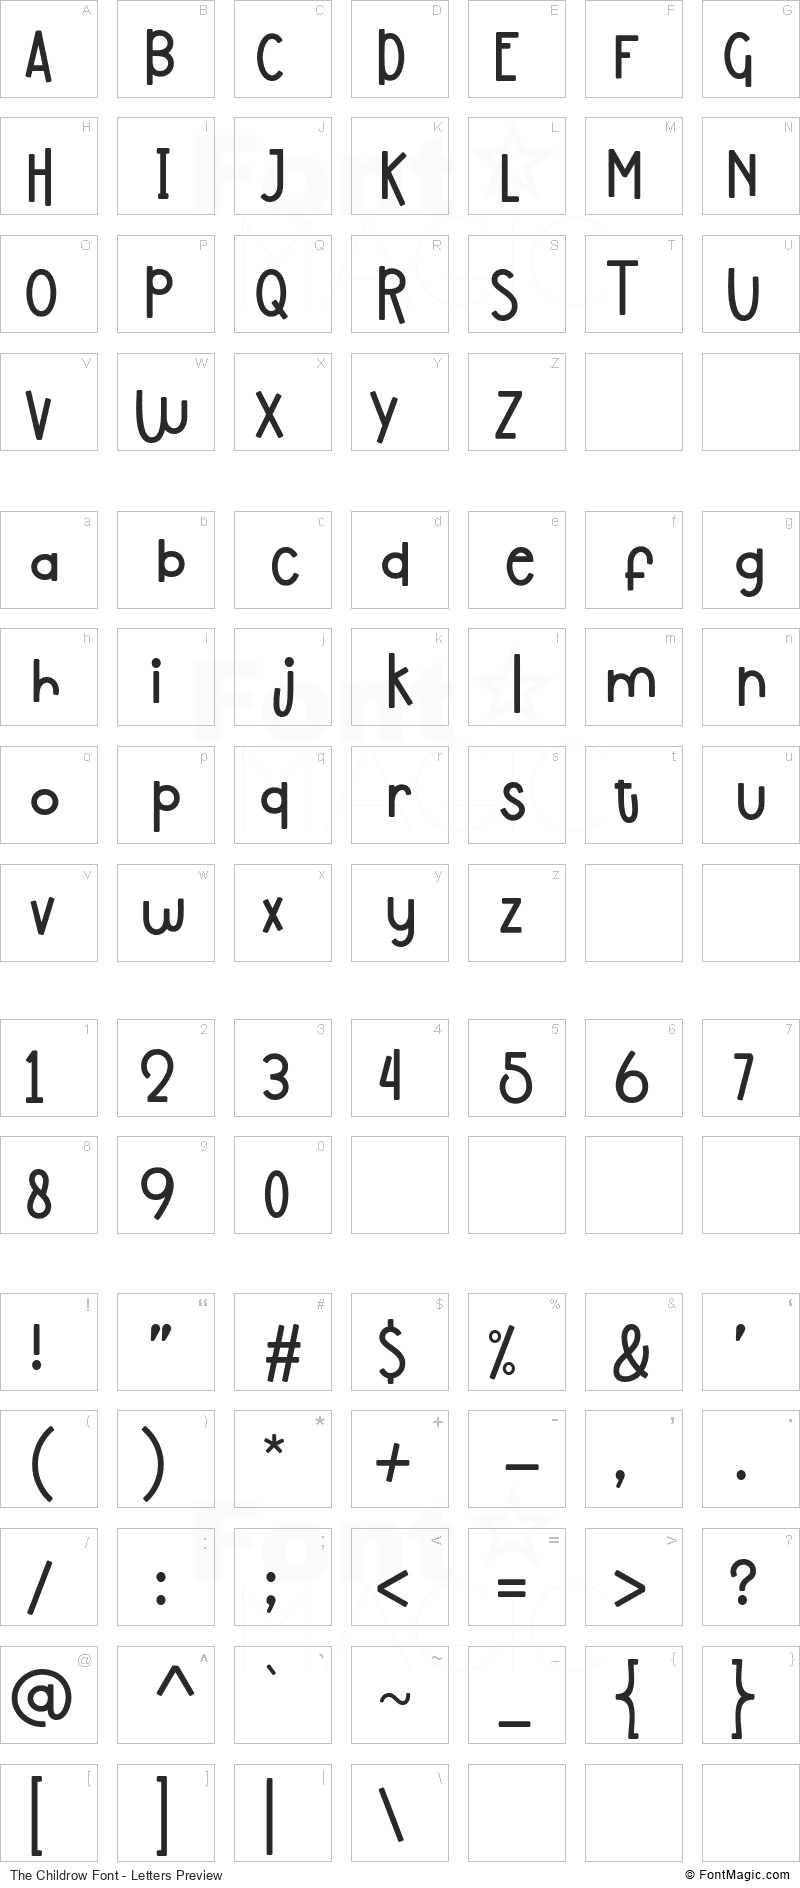 The Childrow Font - All Latters Preview Chart